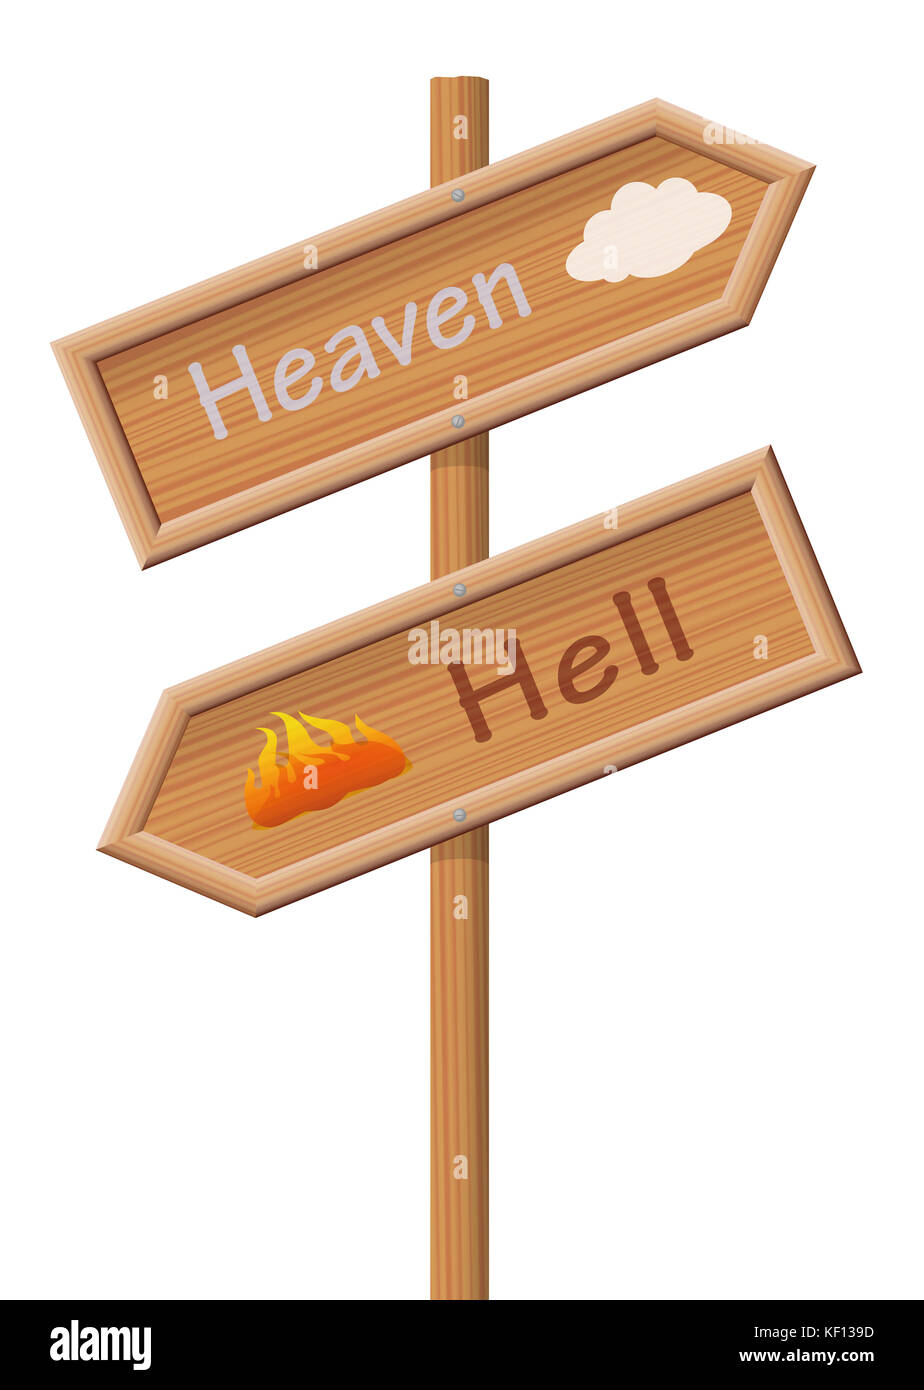 Heaven or hell - two sign posts pointing in opposite directions, one upwards to paradise the other one downwards for the the bad, evil, wicked ones. Stock Photo